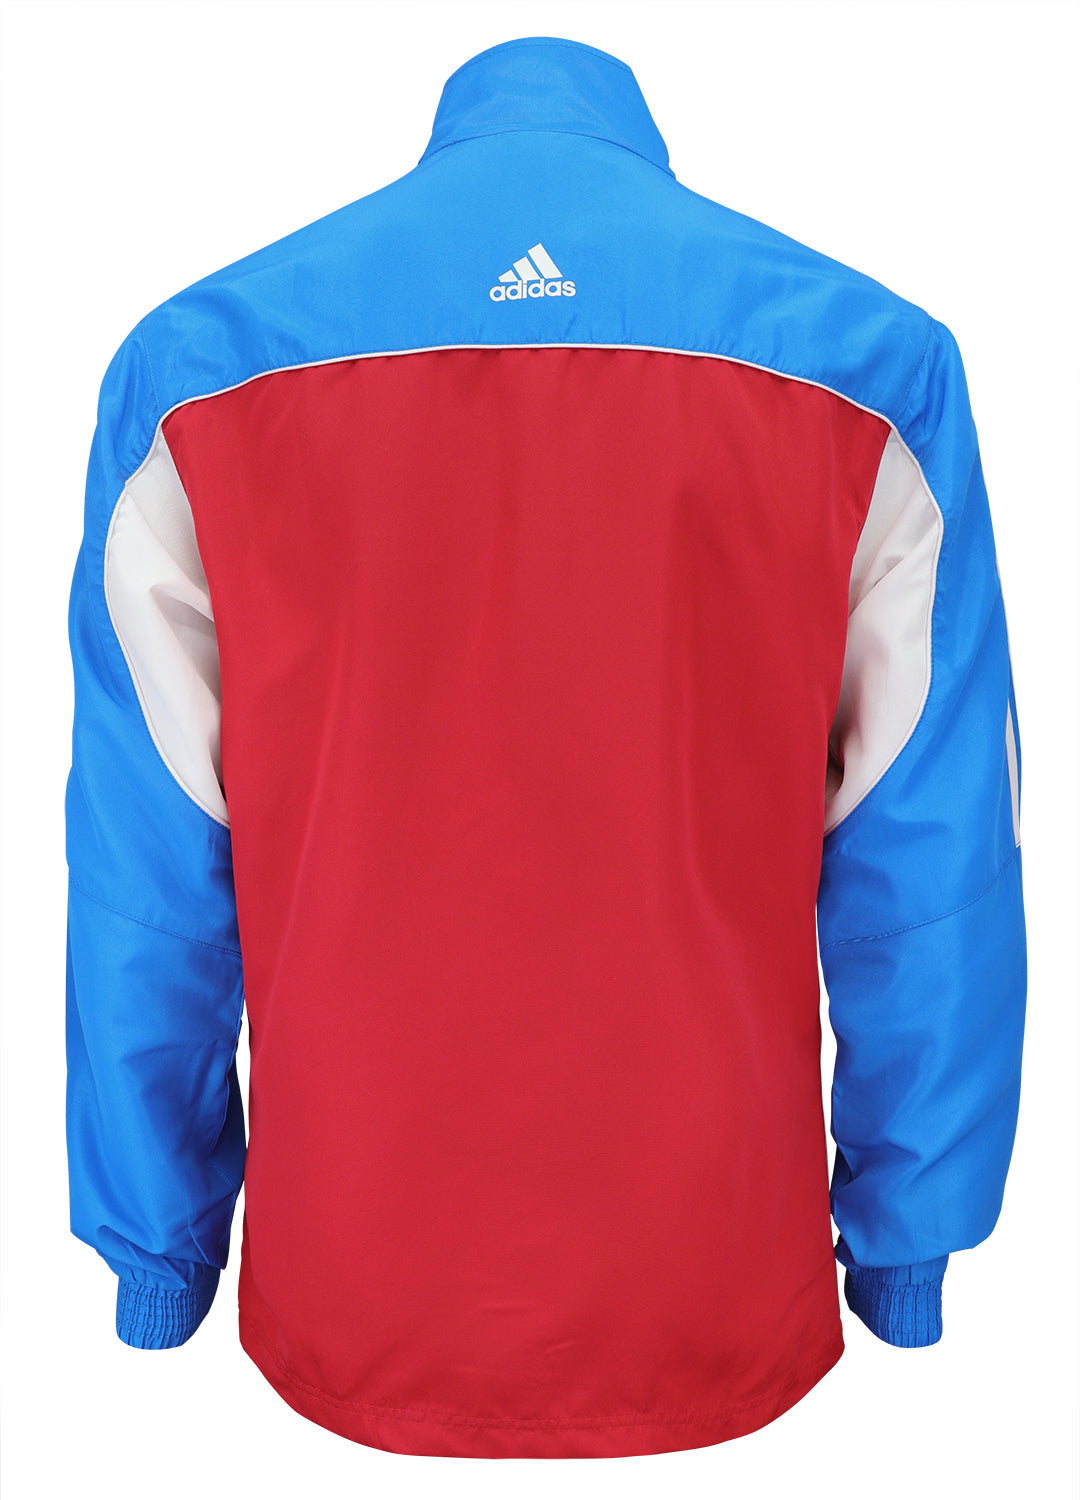 adidas Red White Blue Windbreaker Style Team Jacket Back View